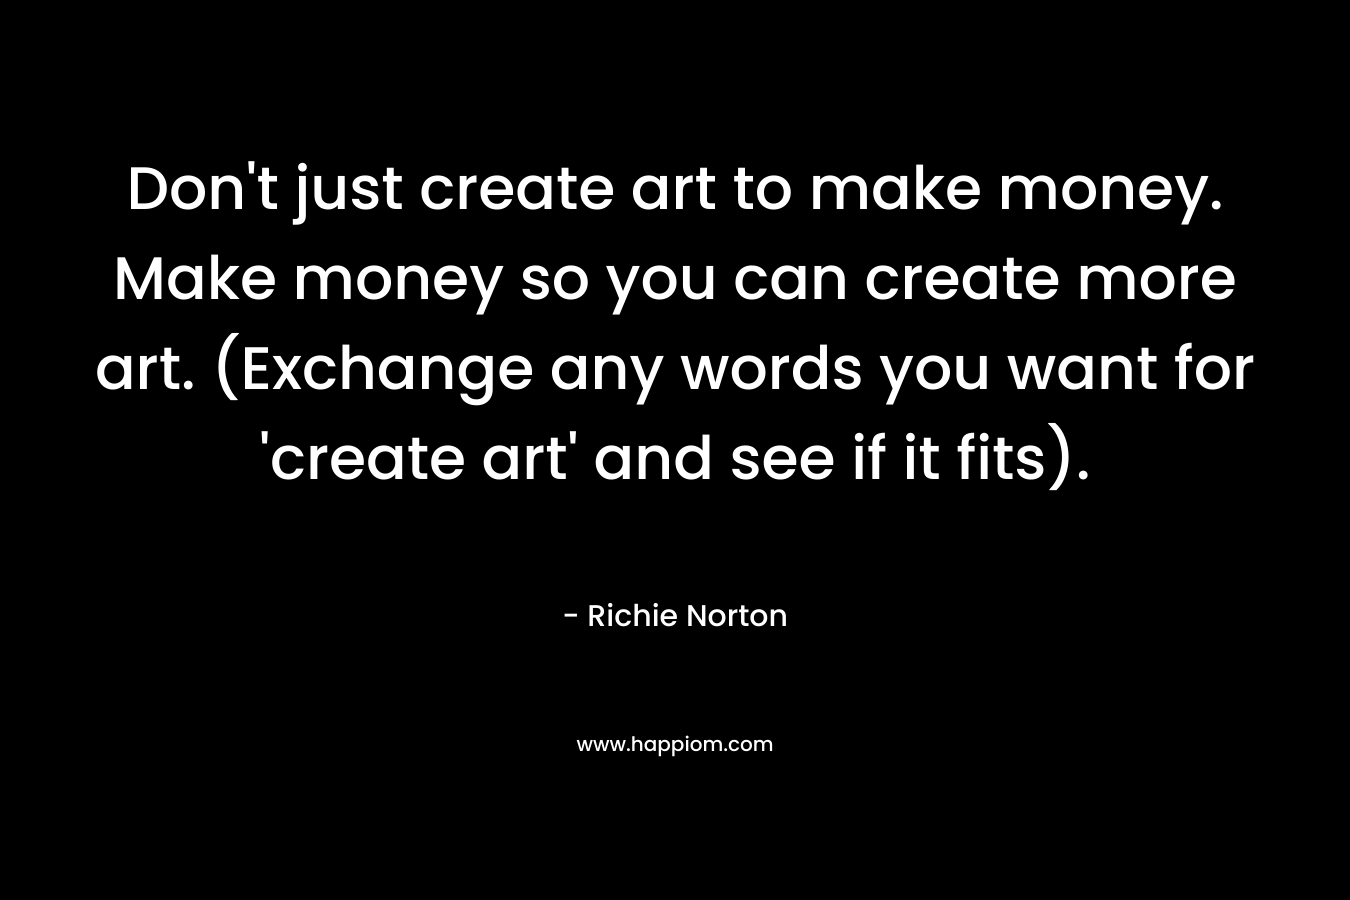 Don't just create art to make money. Make money so you can create more art. (Exchange any words you want for 'create art' and see if it fits).